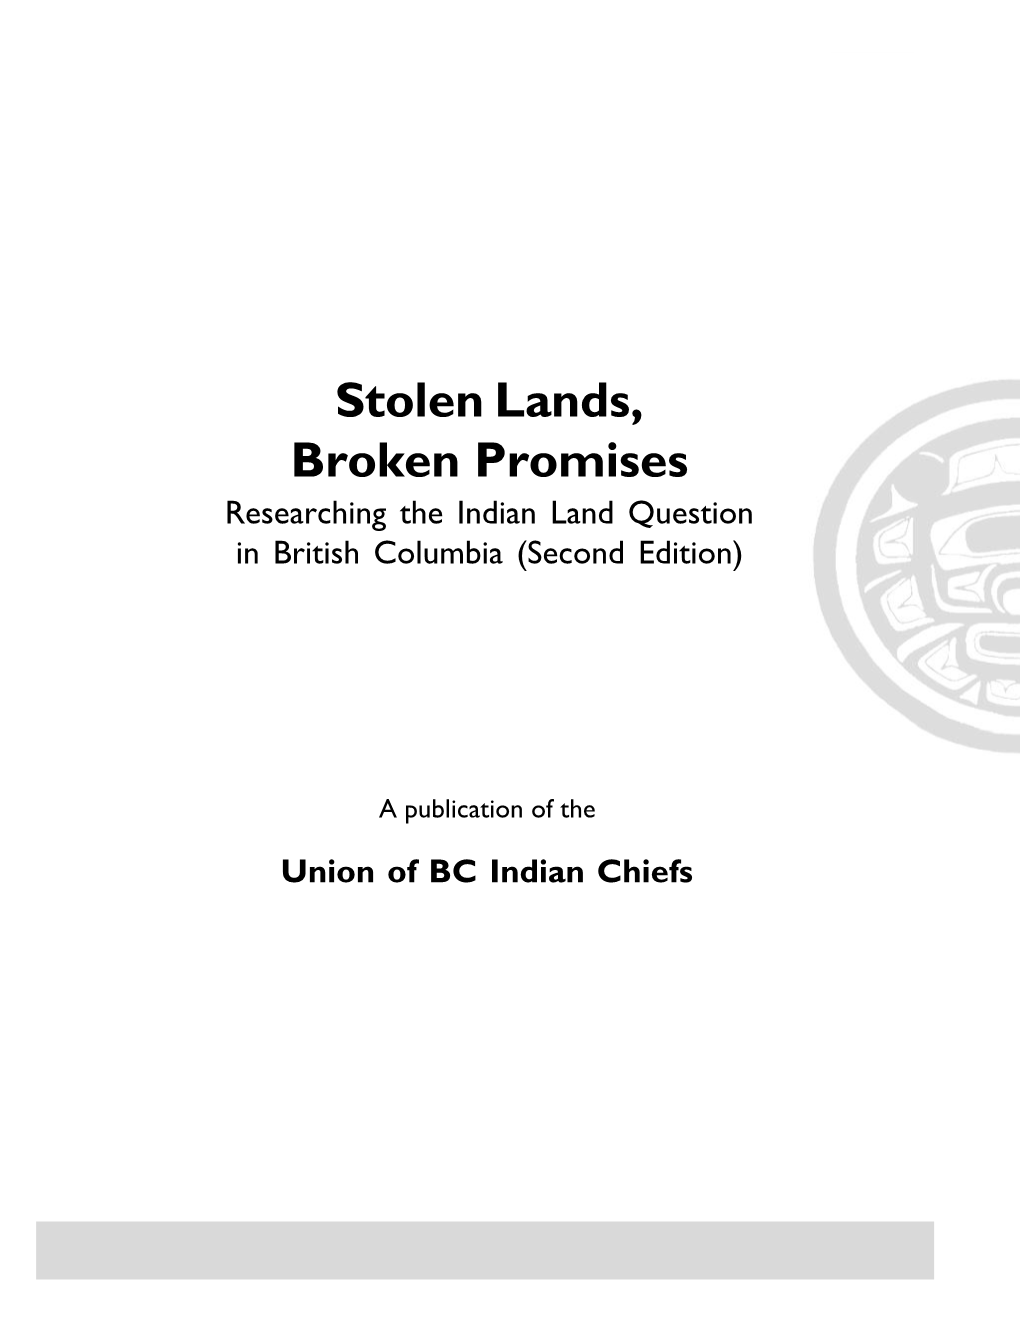 Stolen Lands, Broken Promises Researching the Indian Land Question in British Columbia (Second Edition)